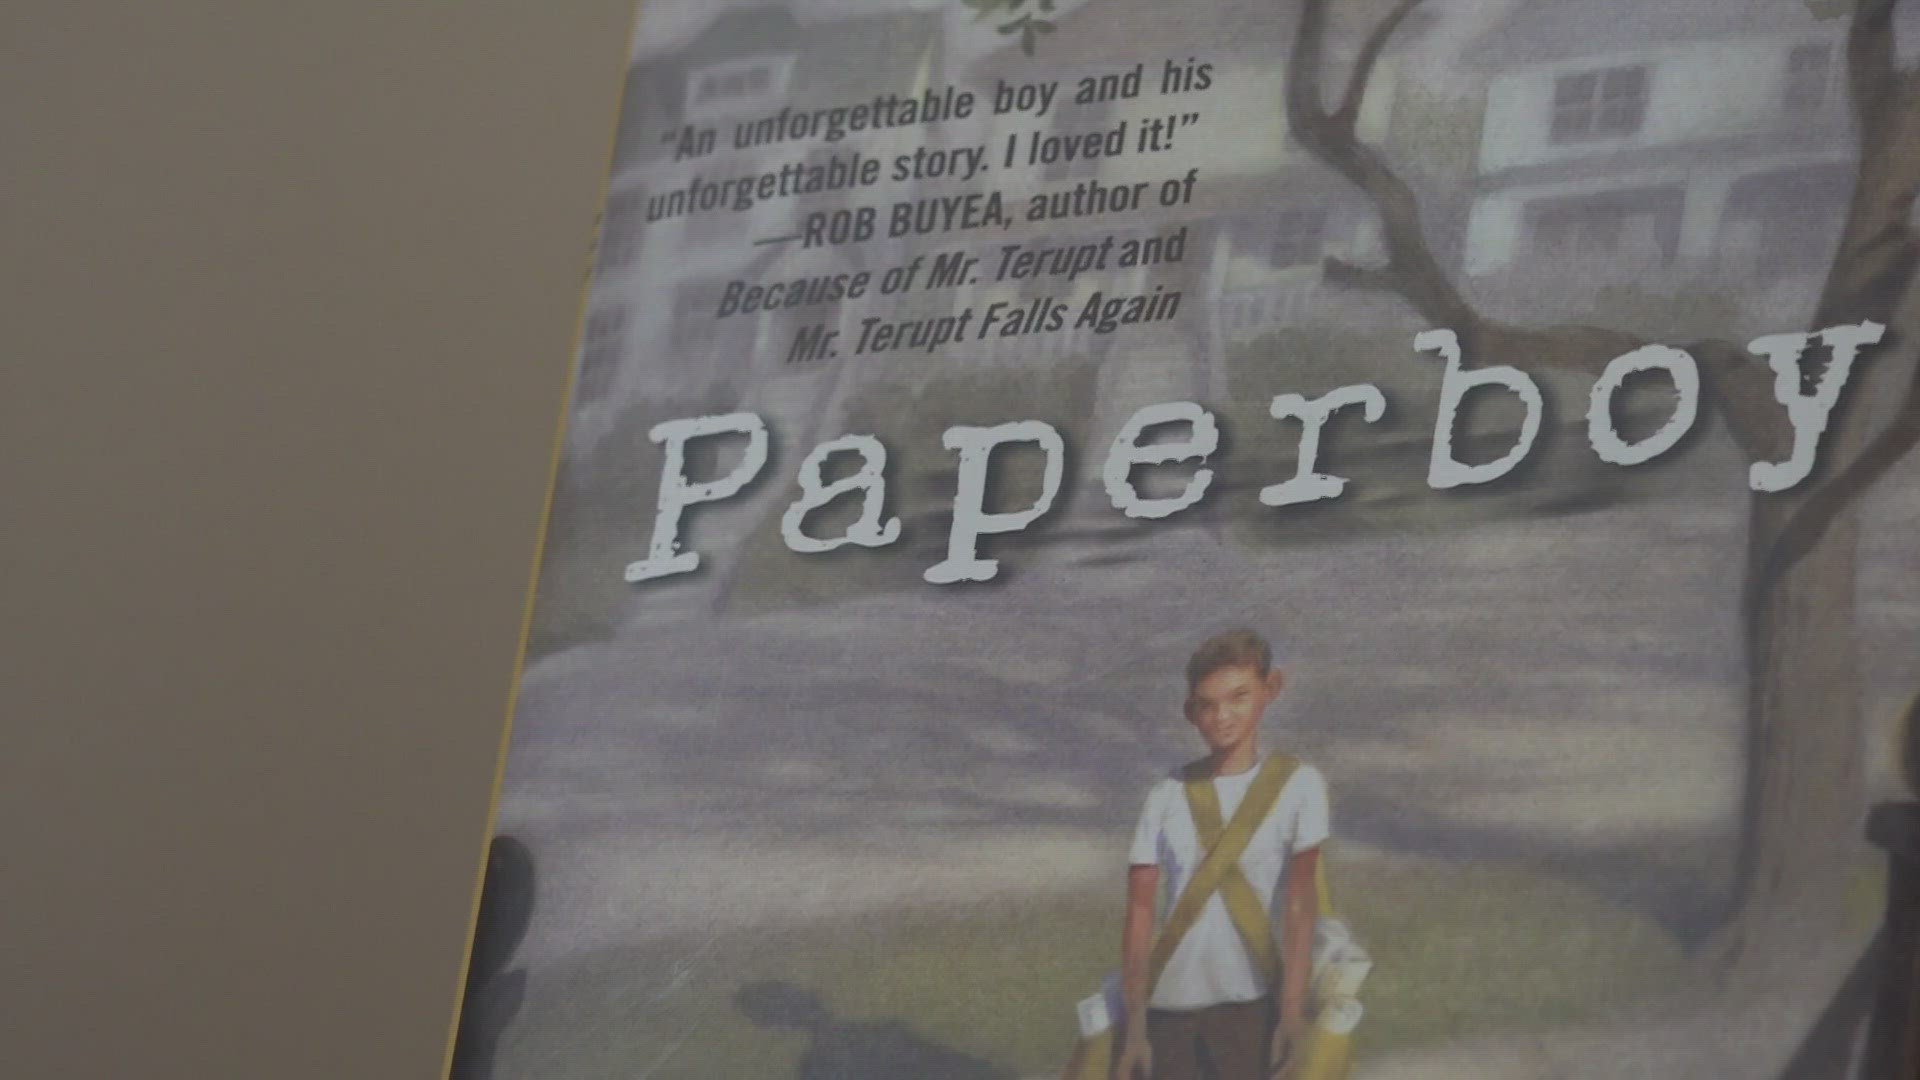 The story is about an 11-year-old boy, Vince Vawter, who navigates through the world as a person with a stutter.